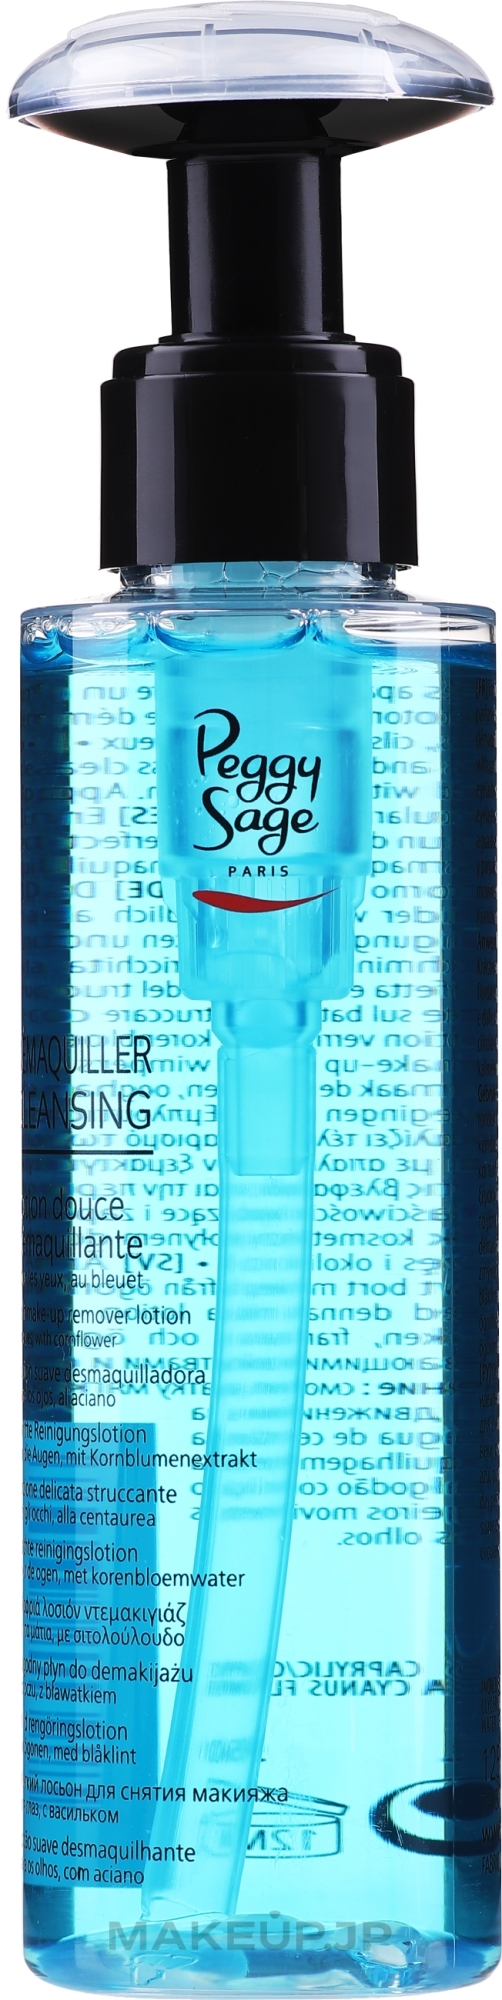 Cornflower Makeup Remover Lotion - Peggy Sage Soft Make-up Remover Lotion — photo 125 ml